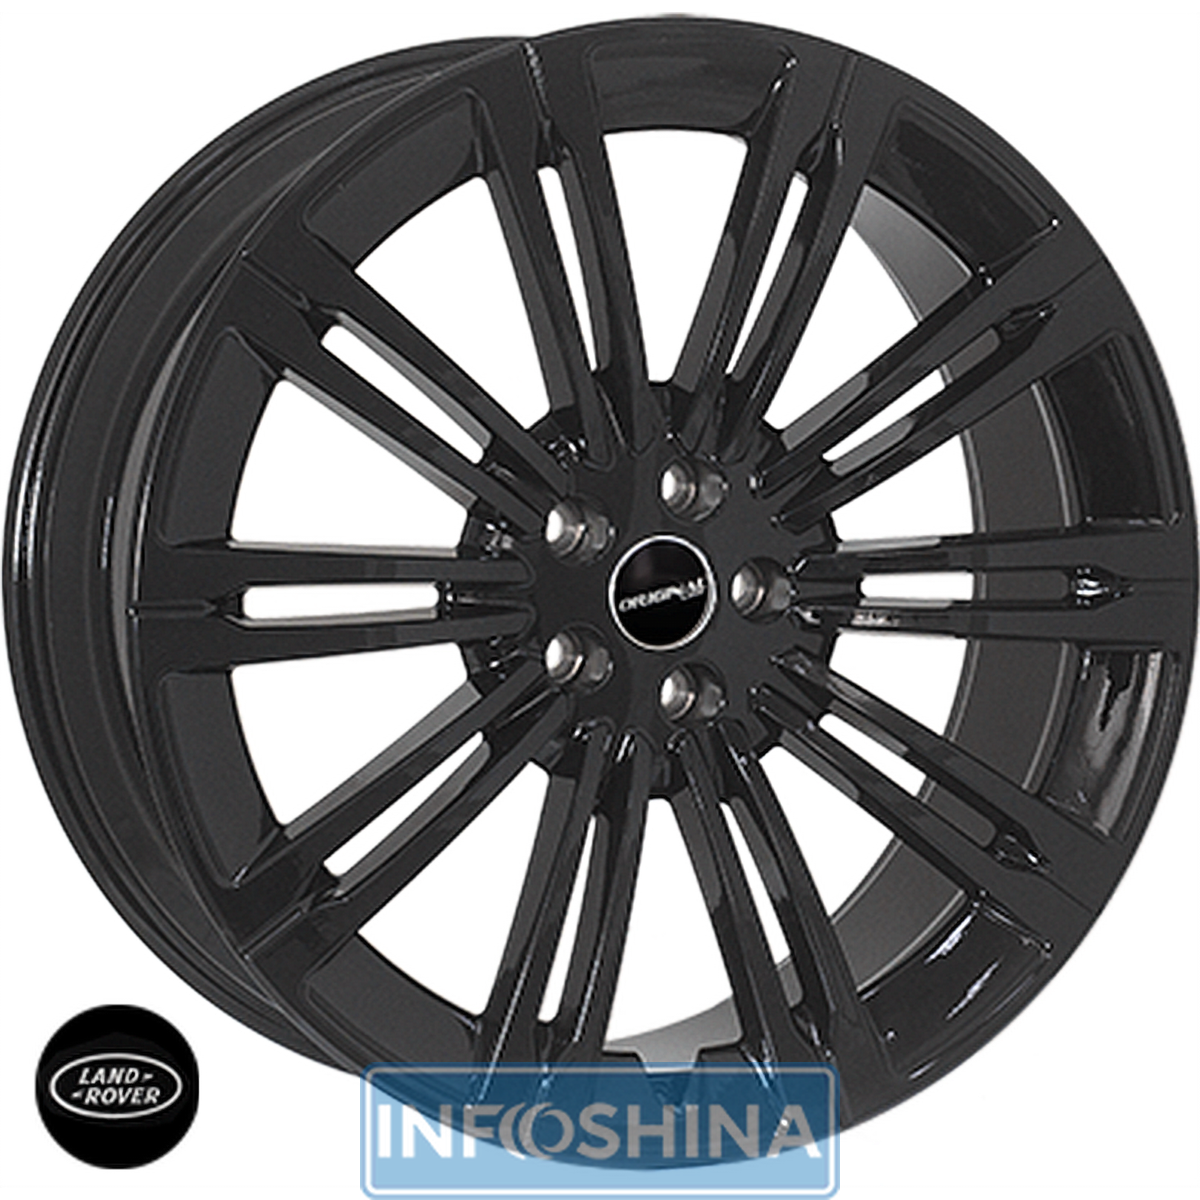 JH RGW9189 Forged Black